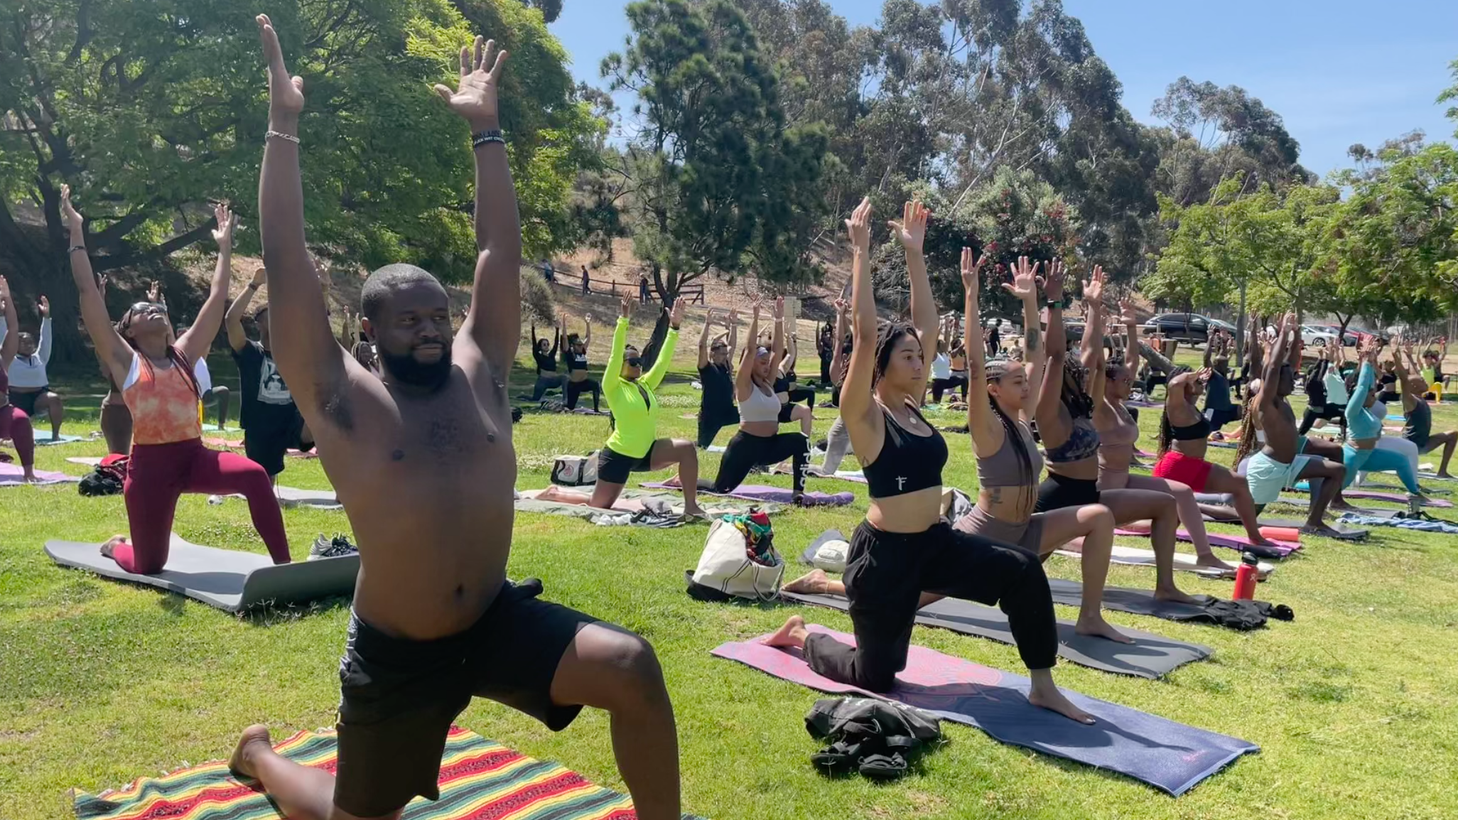 Lenny Gaiter (left) started coming to WalkGood LA yoga classes when they started two years ago, after he learned it was part of a local racial equity movement. The free classes attract hundreds to Kenneth Hahn State Park each week.